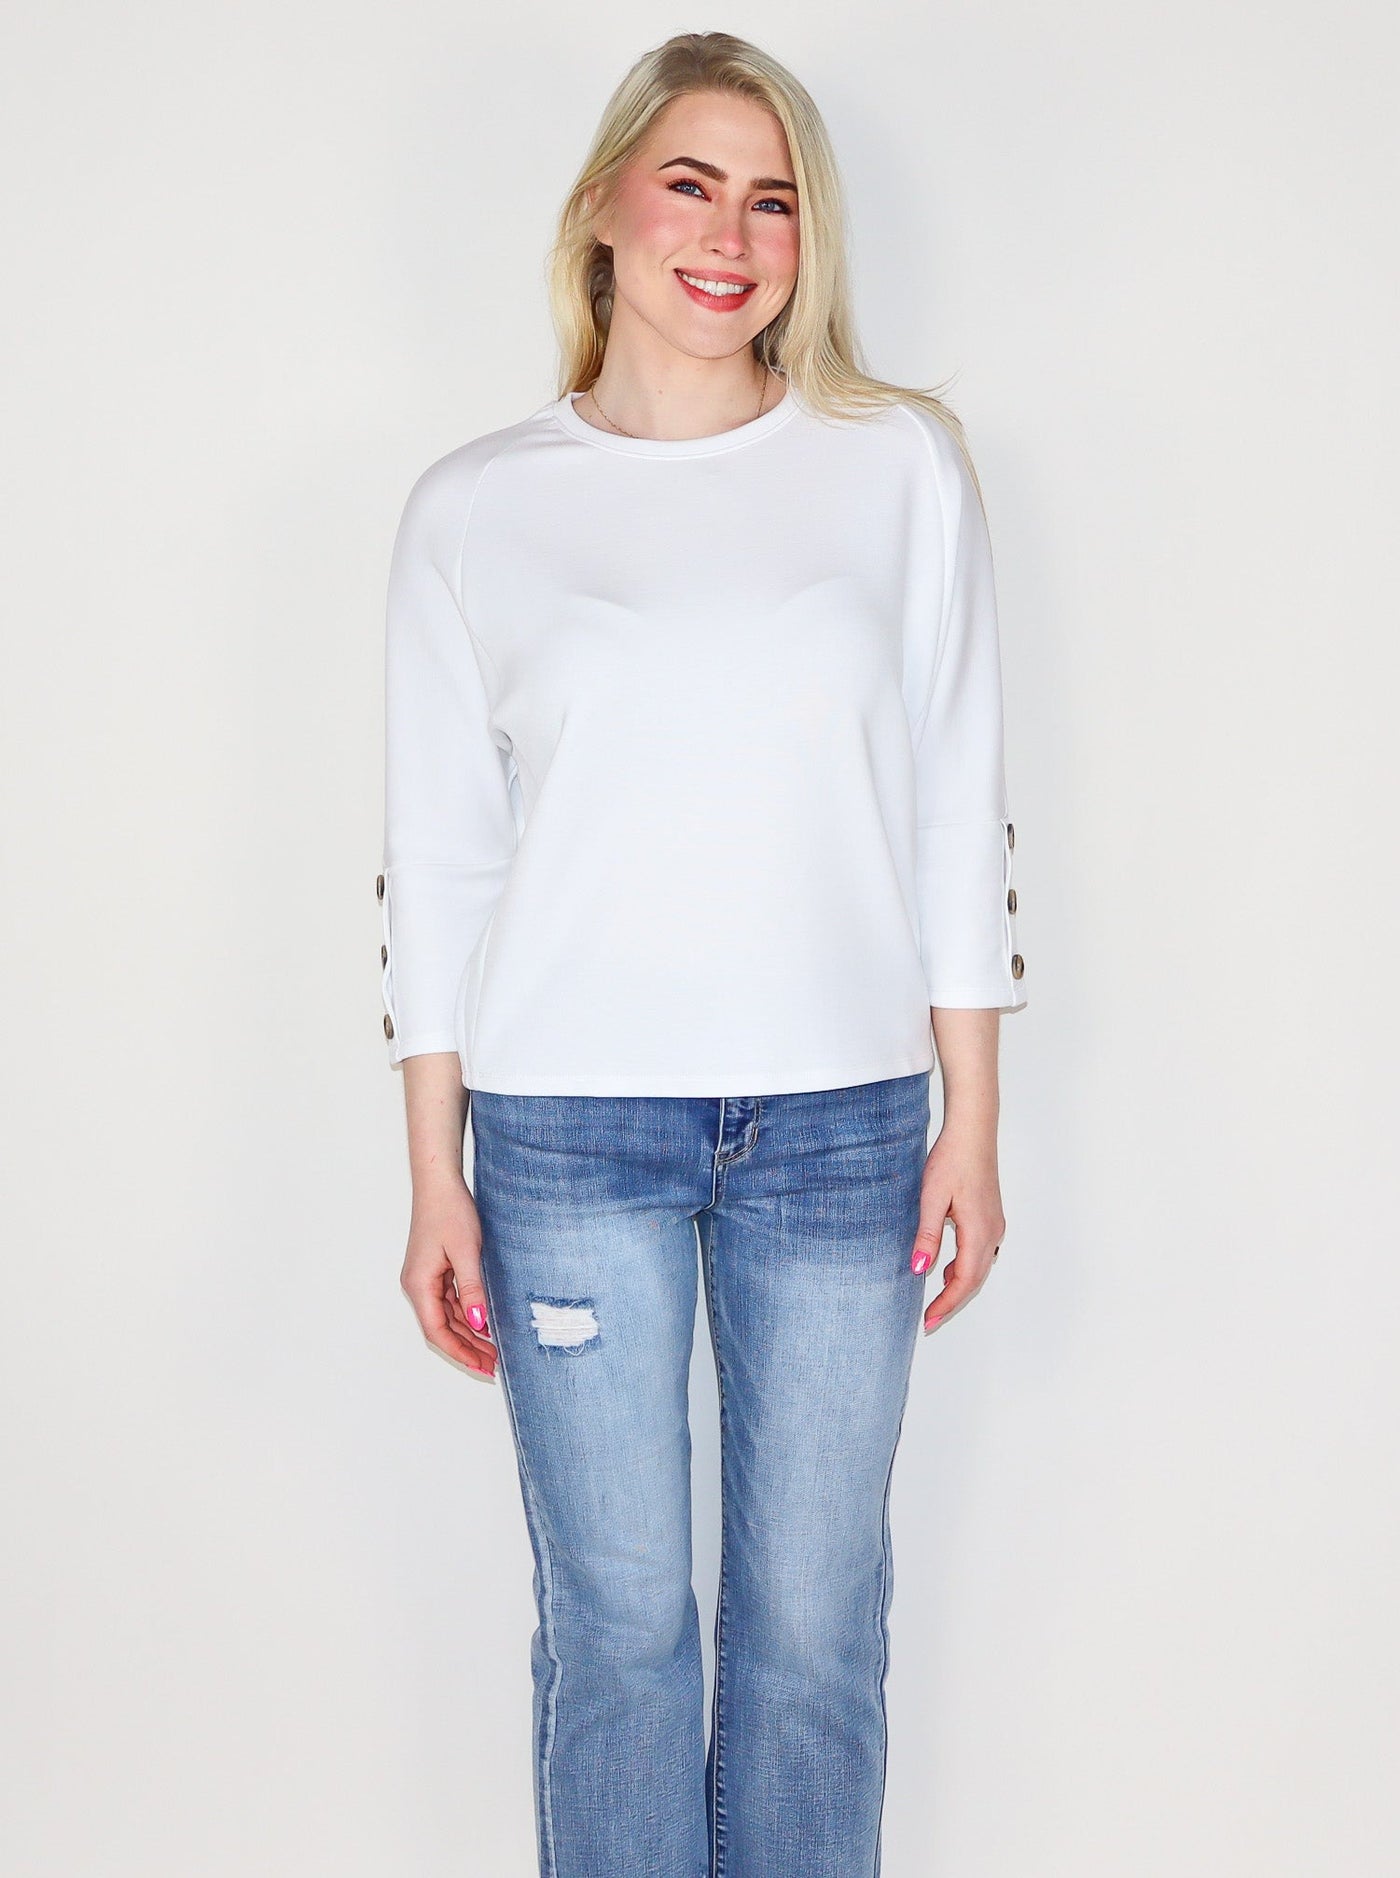 Model is wearing a white 3/4th sleeve top with 3 brown buttons on each sleeve. Top is worn with blue jeans. 